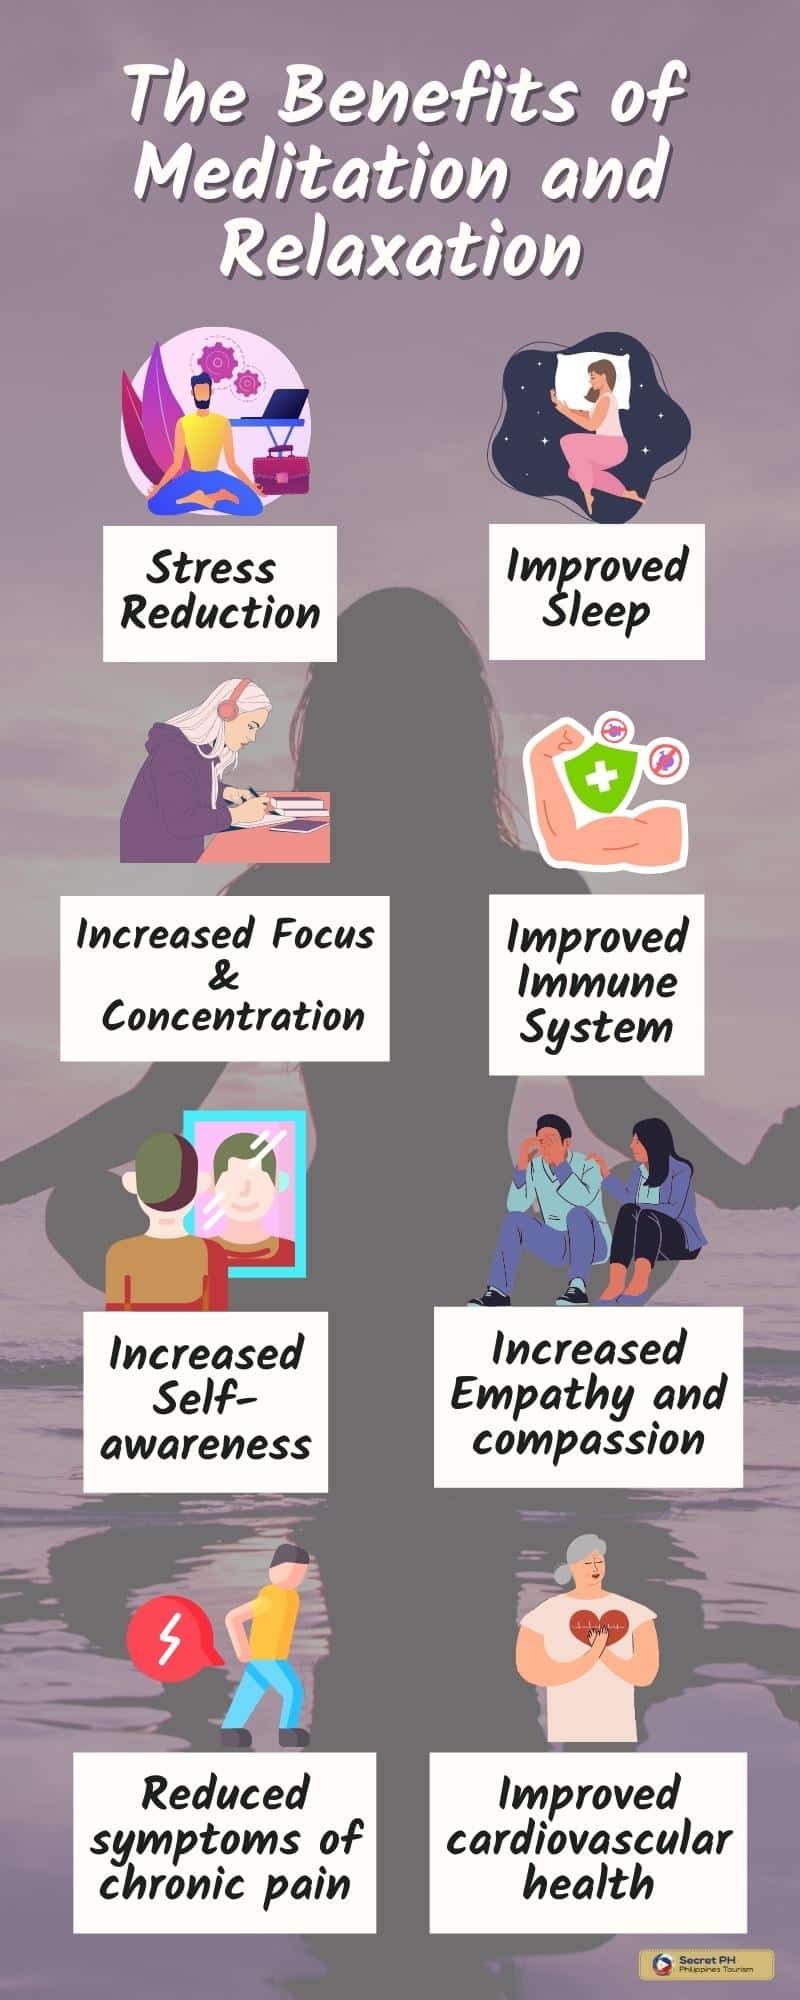 The Benefits of Meditation and Relaxation